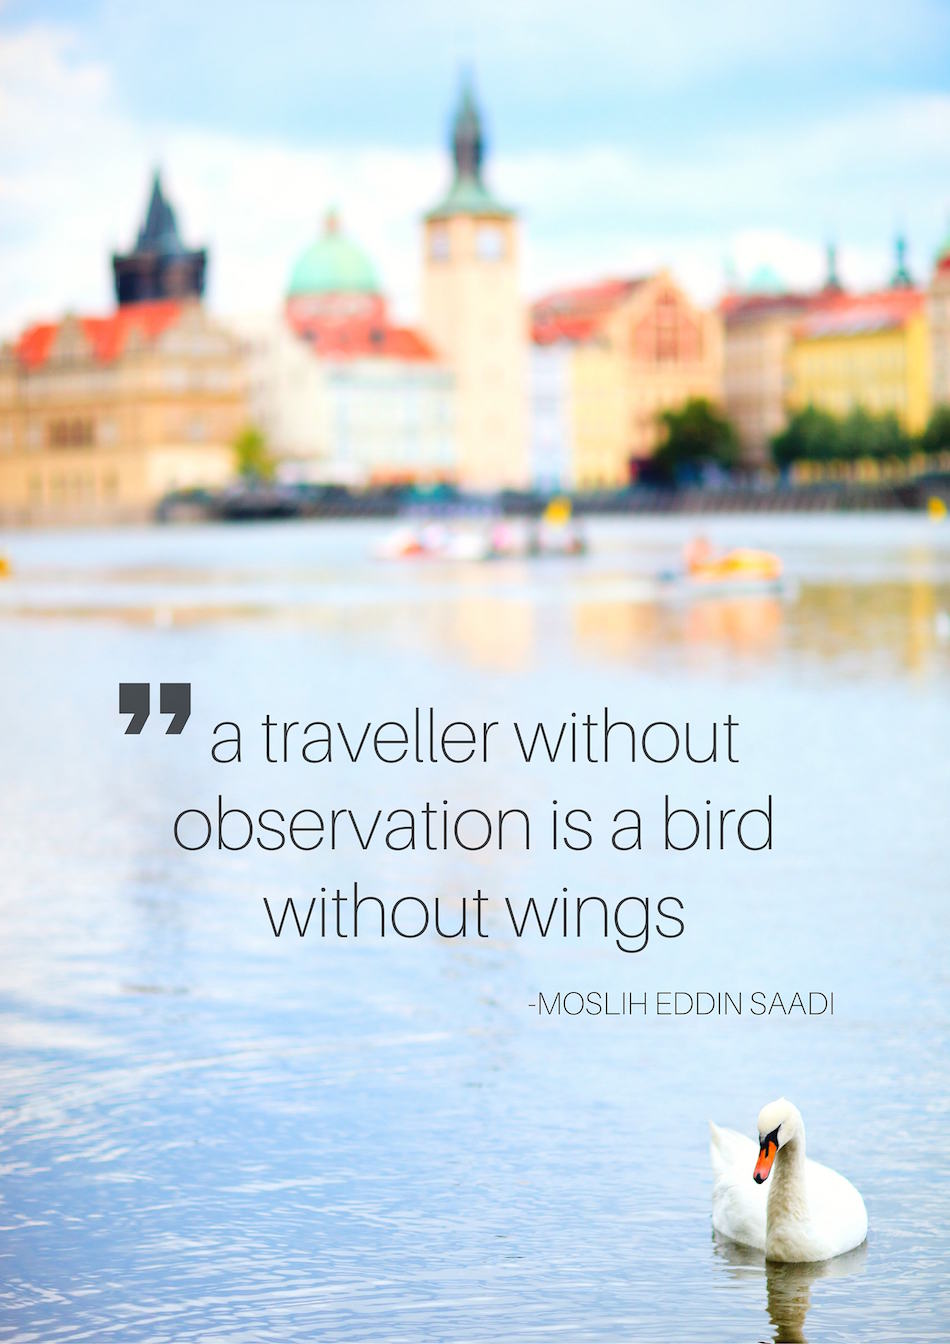 a traveller without observation is a bird without wings moslih eddin saadi quote